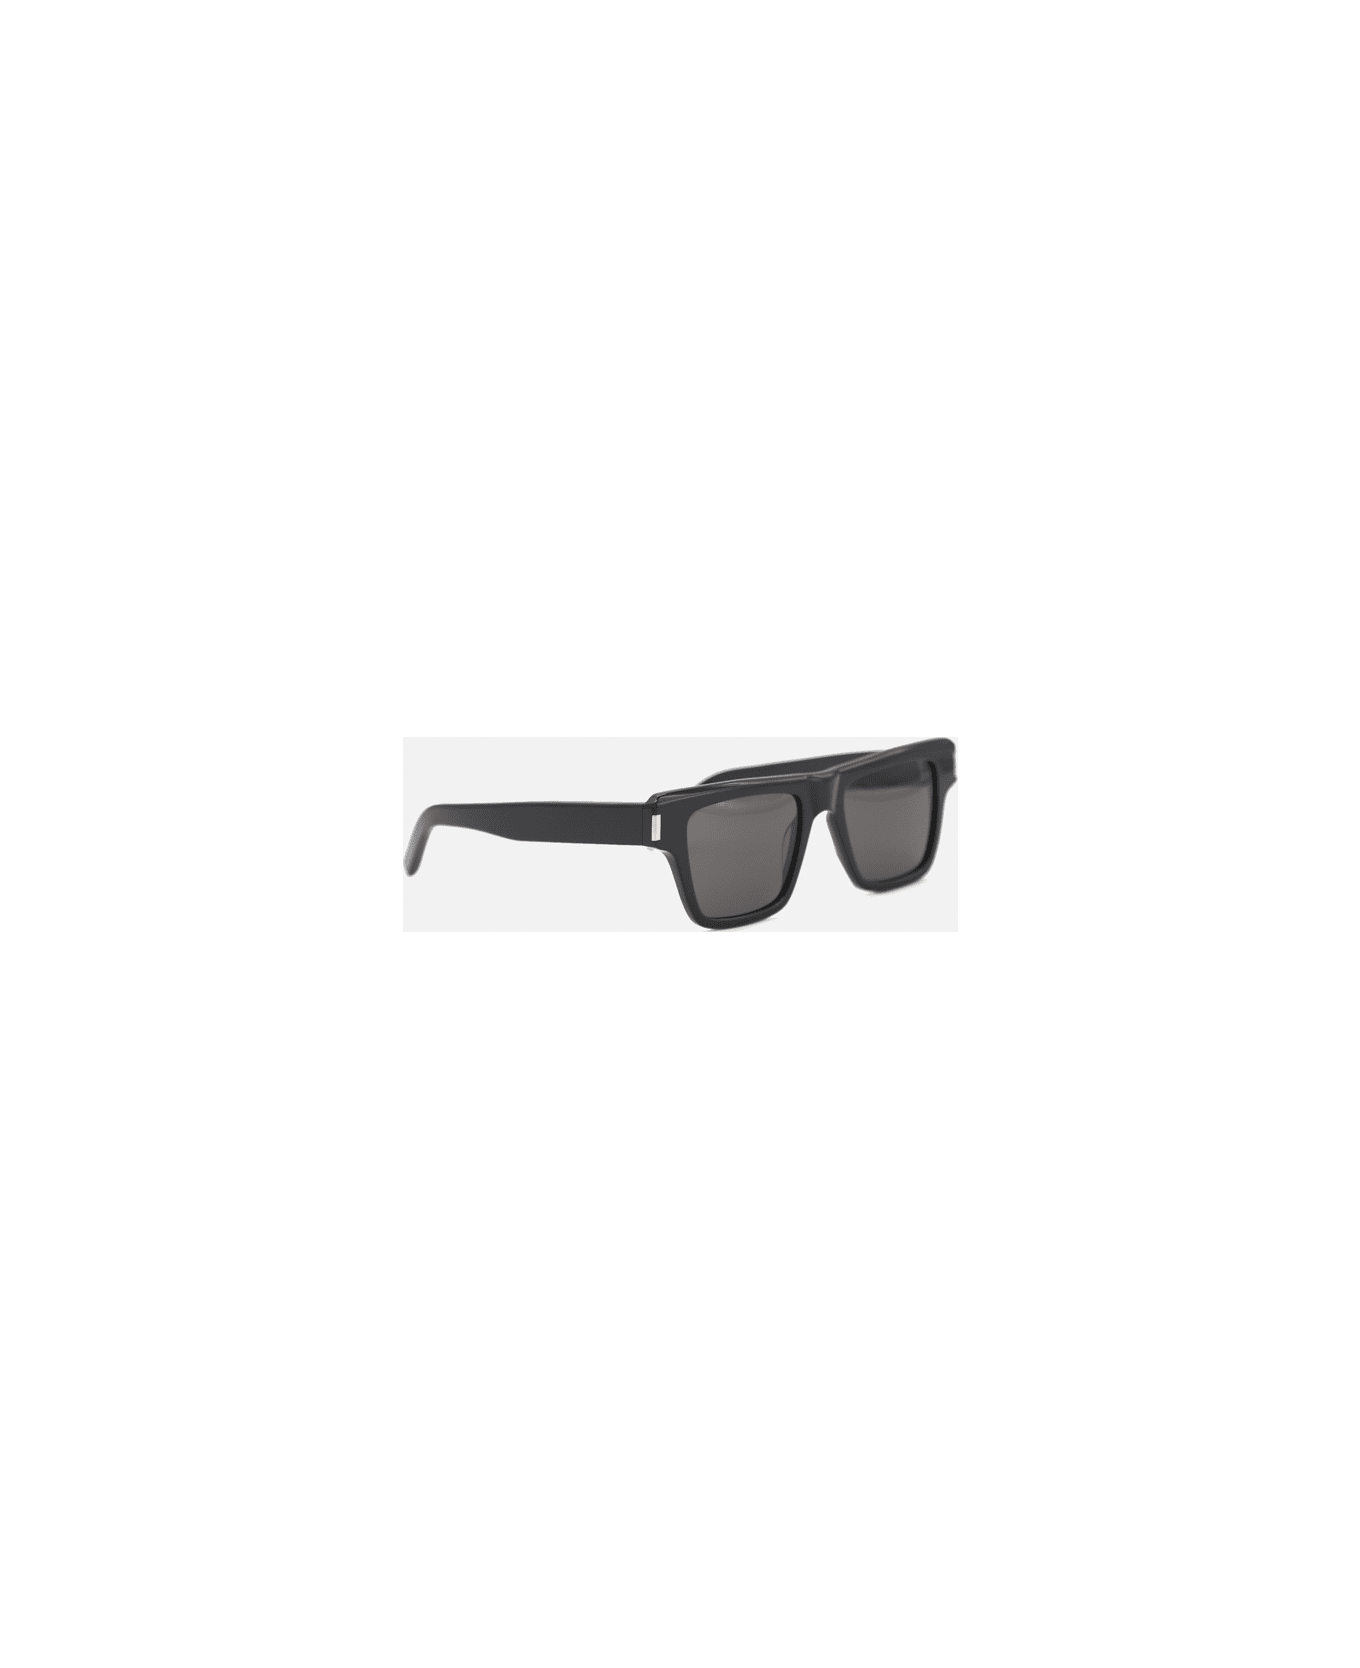 Saint Laurent Sl469 Sunglasses In Acetate With Engraved Logo On Temples - Black アイウェア